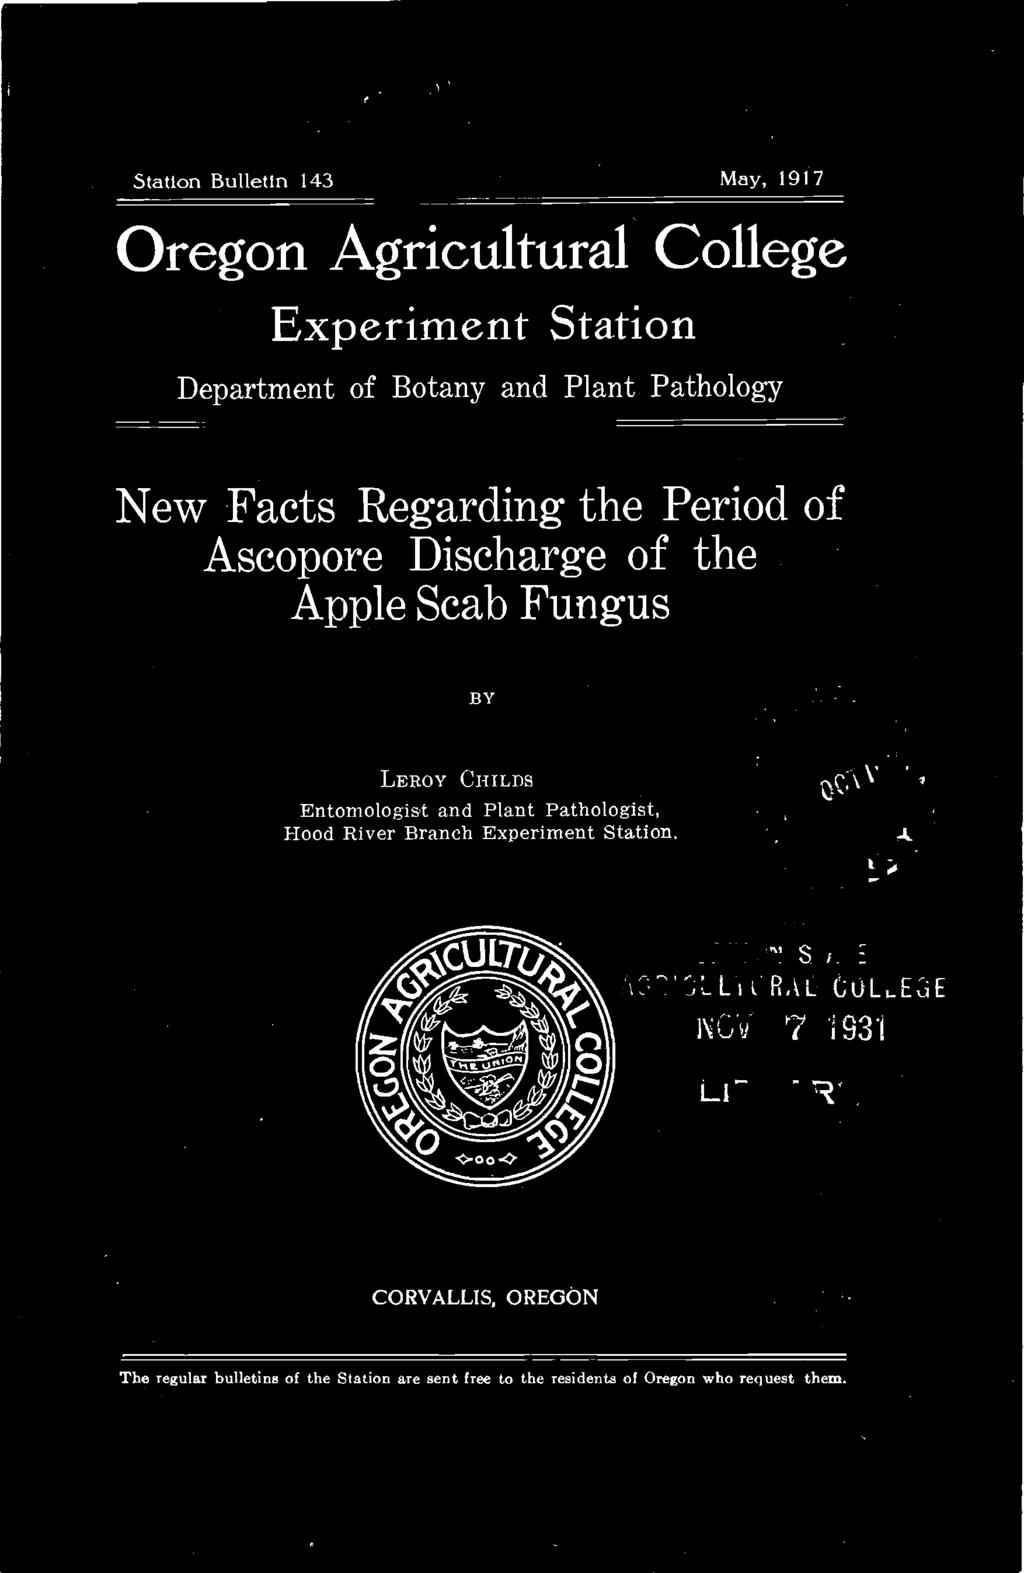 Sttion Bulletin 143 My, 1917 Oregon Agriculturl College Experiment Sttion Deprtment of Botny nd Plnt Pthology New Fcts Regrding the Period of Ascopore Dischrge of the Apple Scb Fungus BY